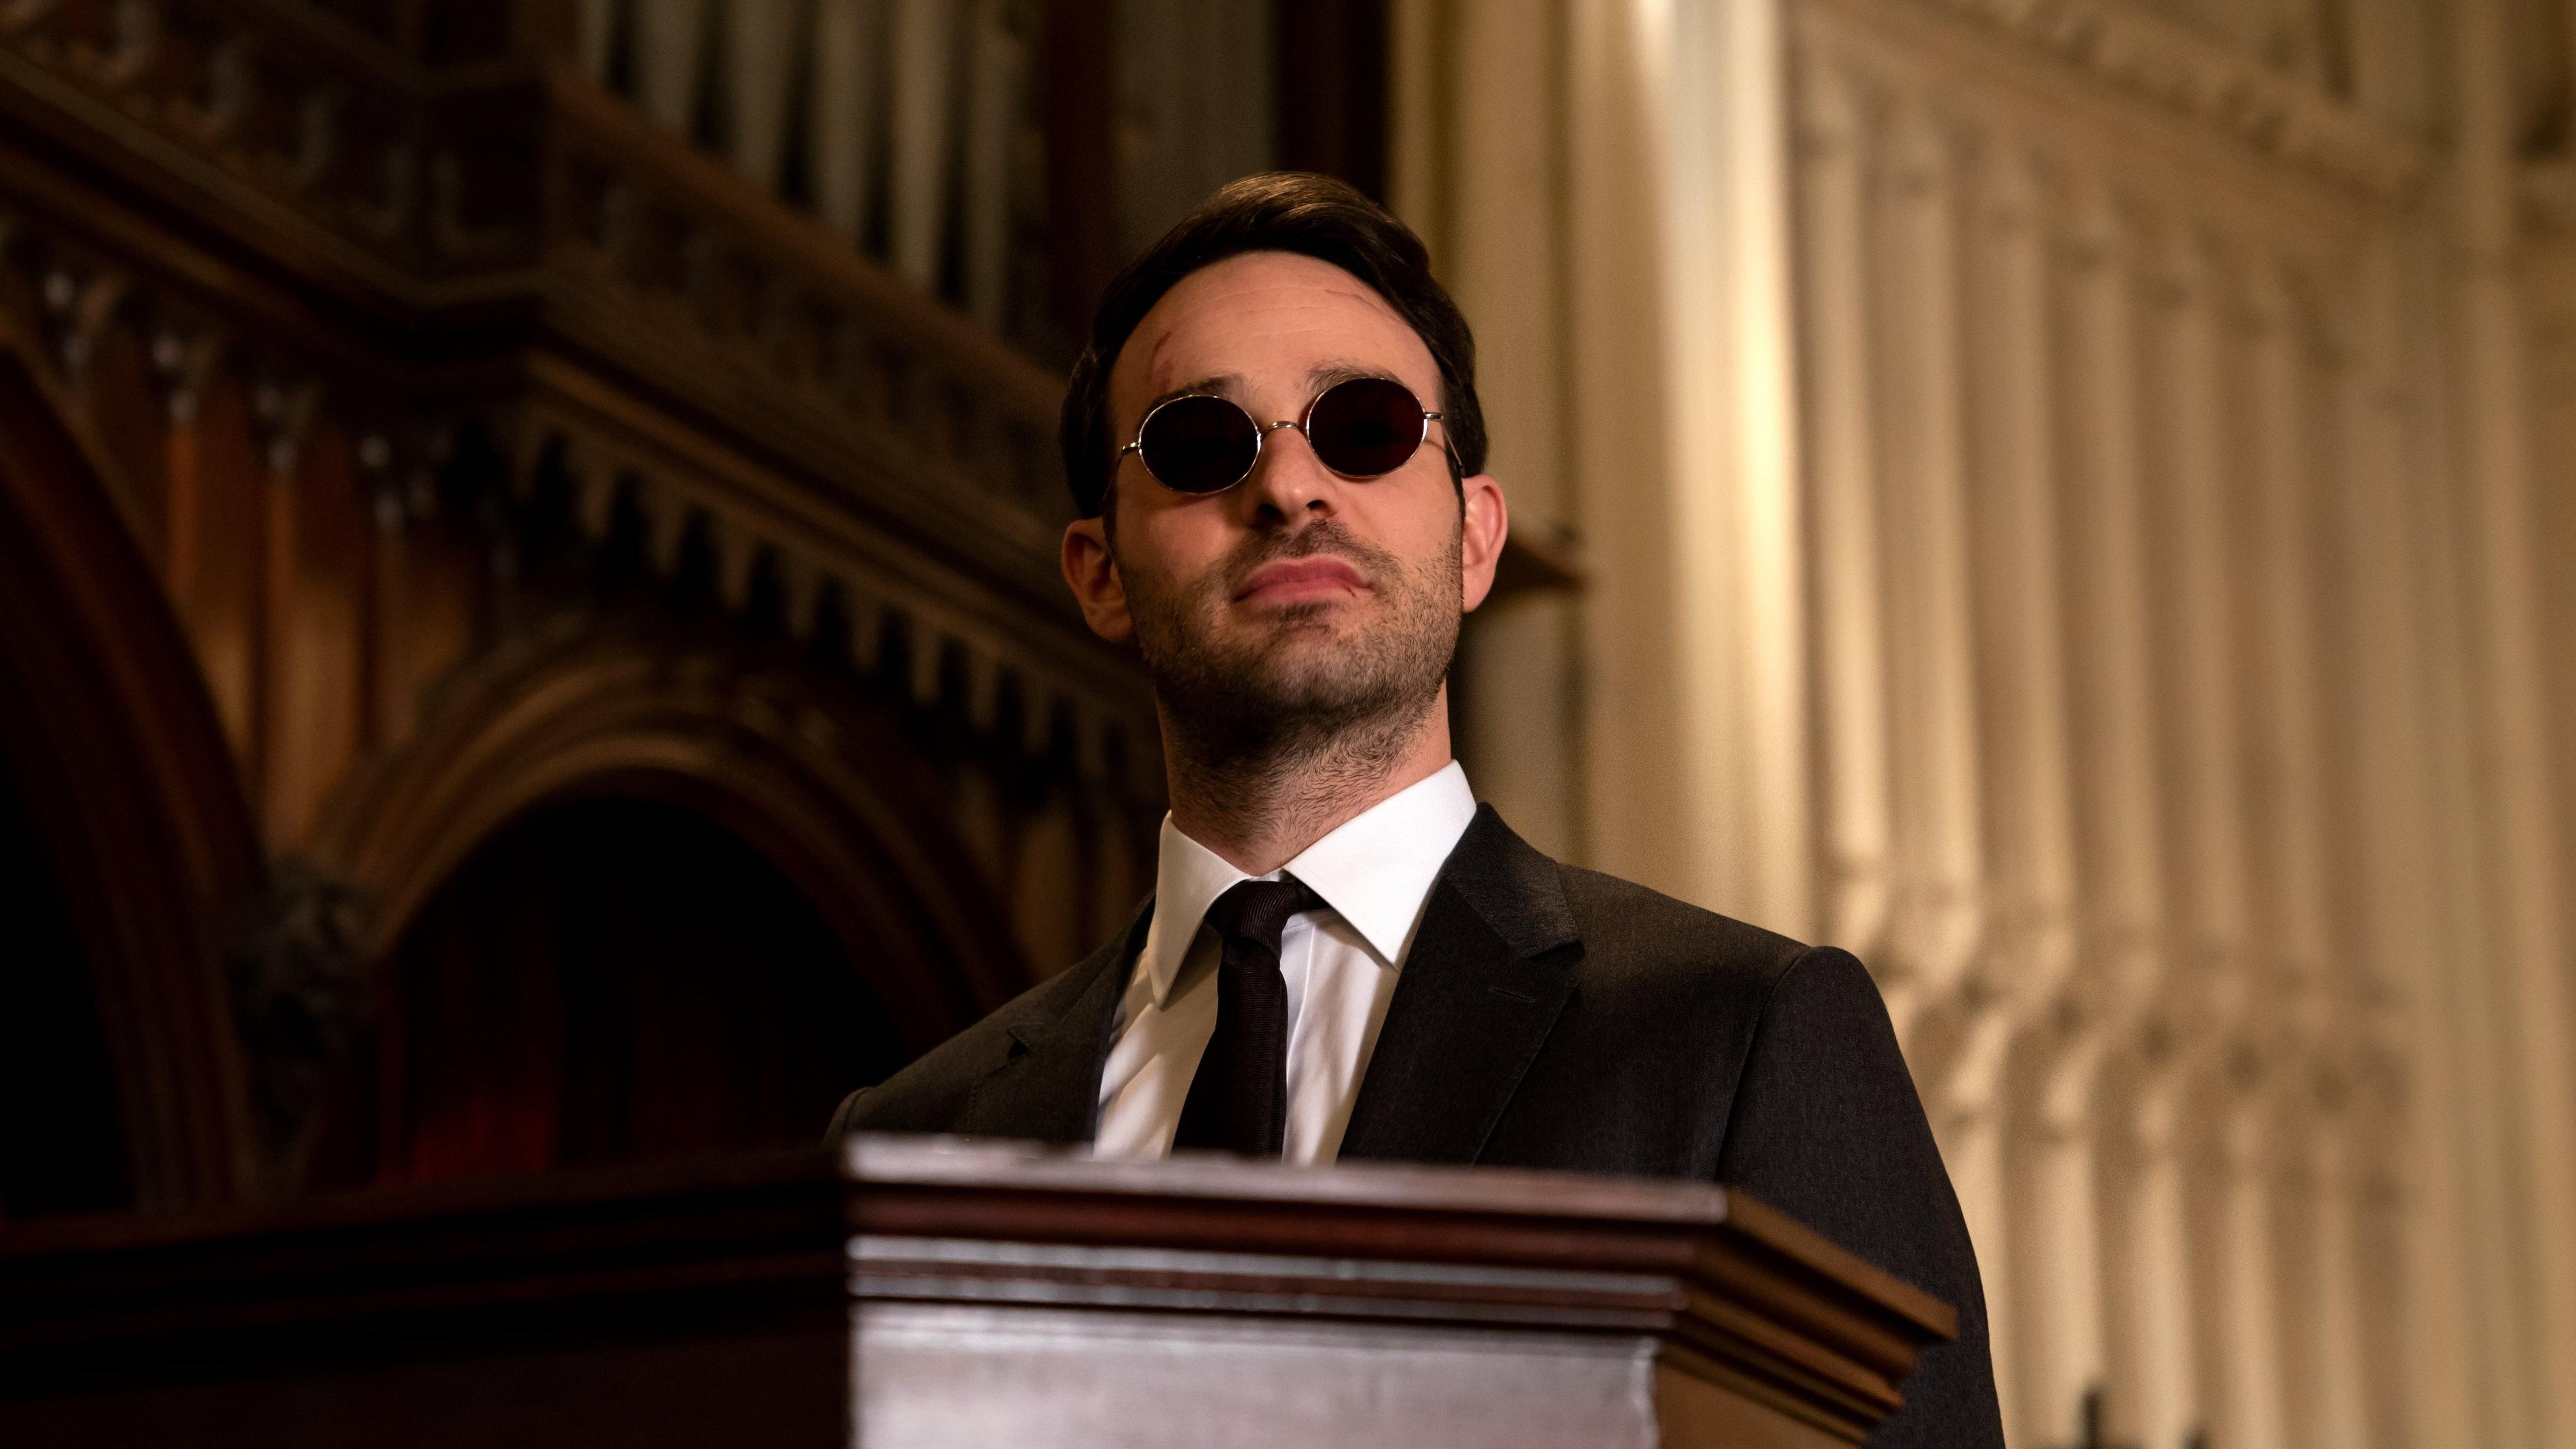 Netflix’s Daredevil spiked in viewers after recent MCU Easter eggs